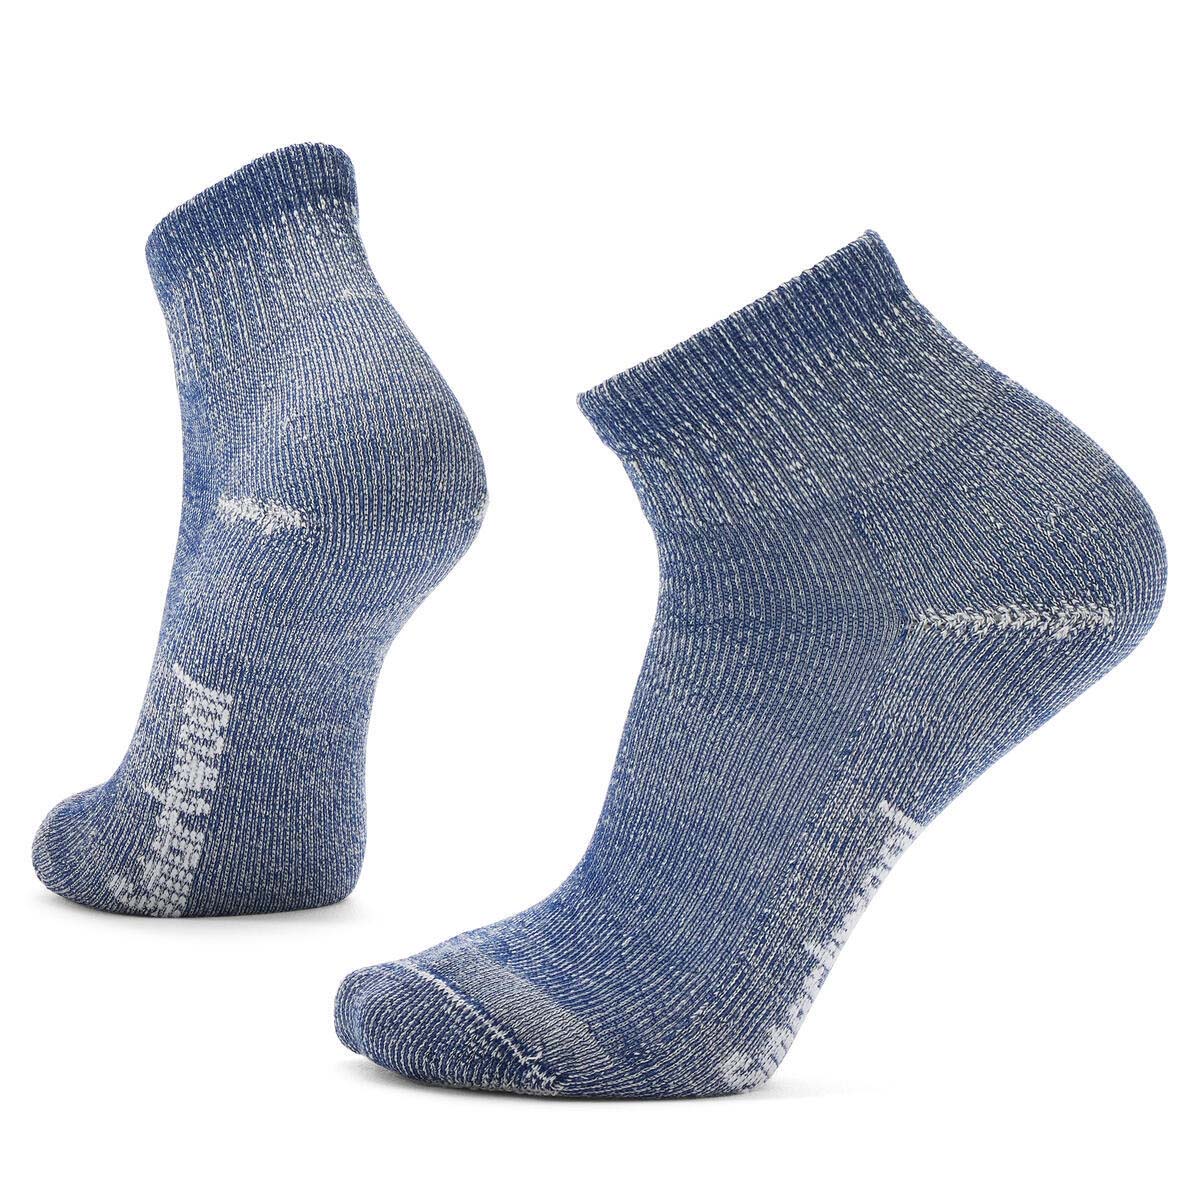 Smartwoll Men's Hike Classic Edition Ankle Socks